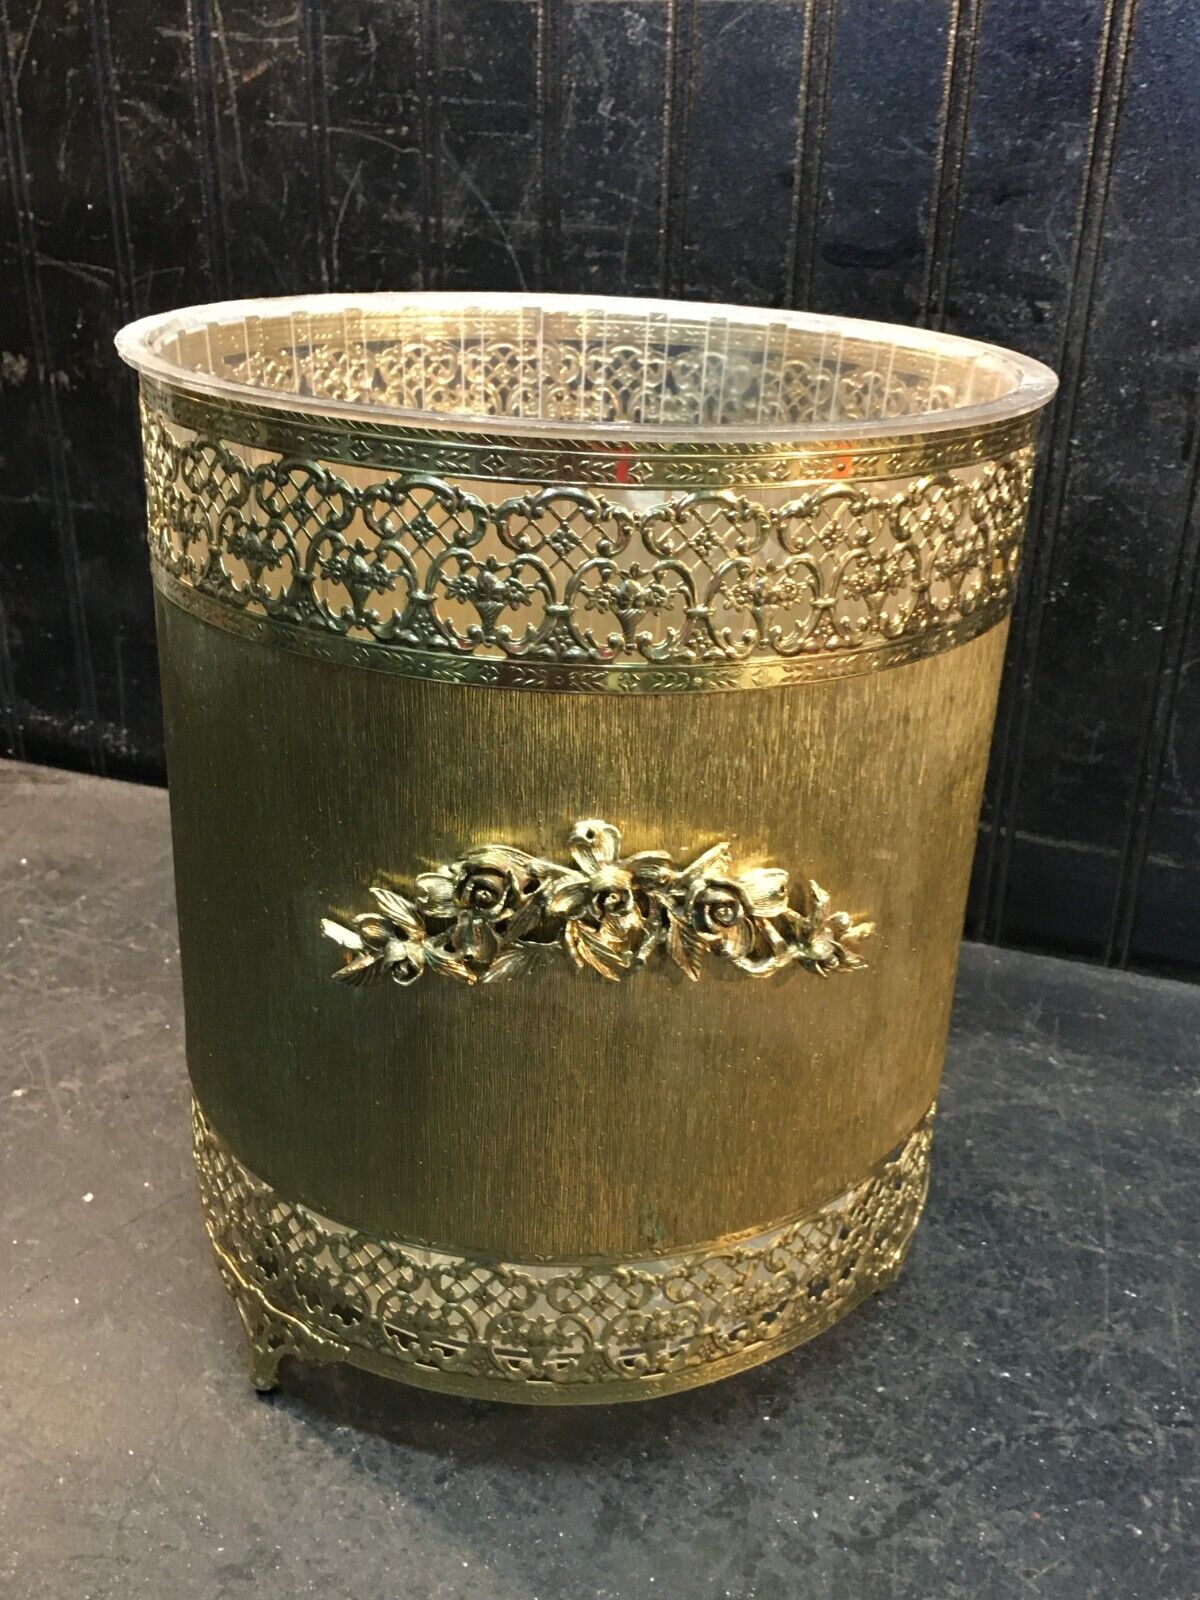 Vintage Mid Century Modern Gold Waste Trash Can Lucite Insert 10in x 8.5in